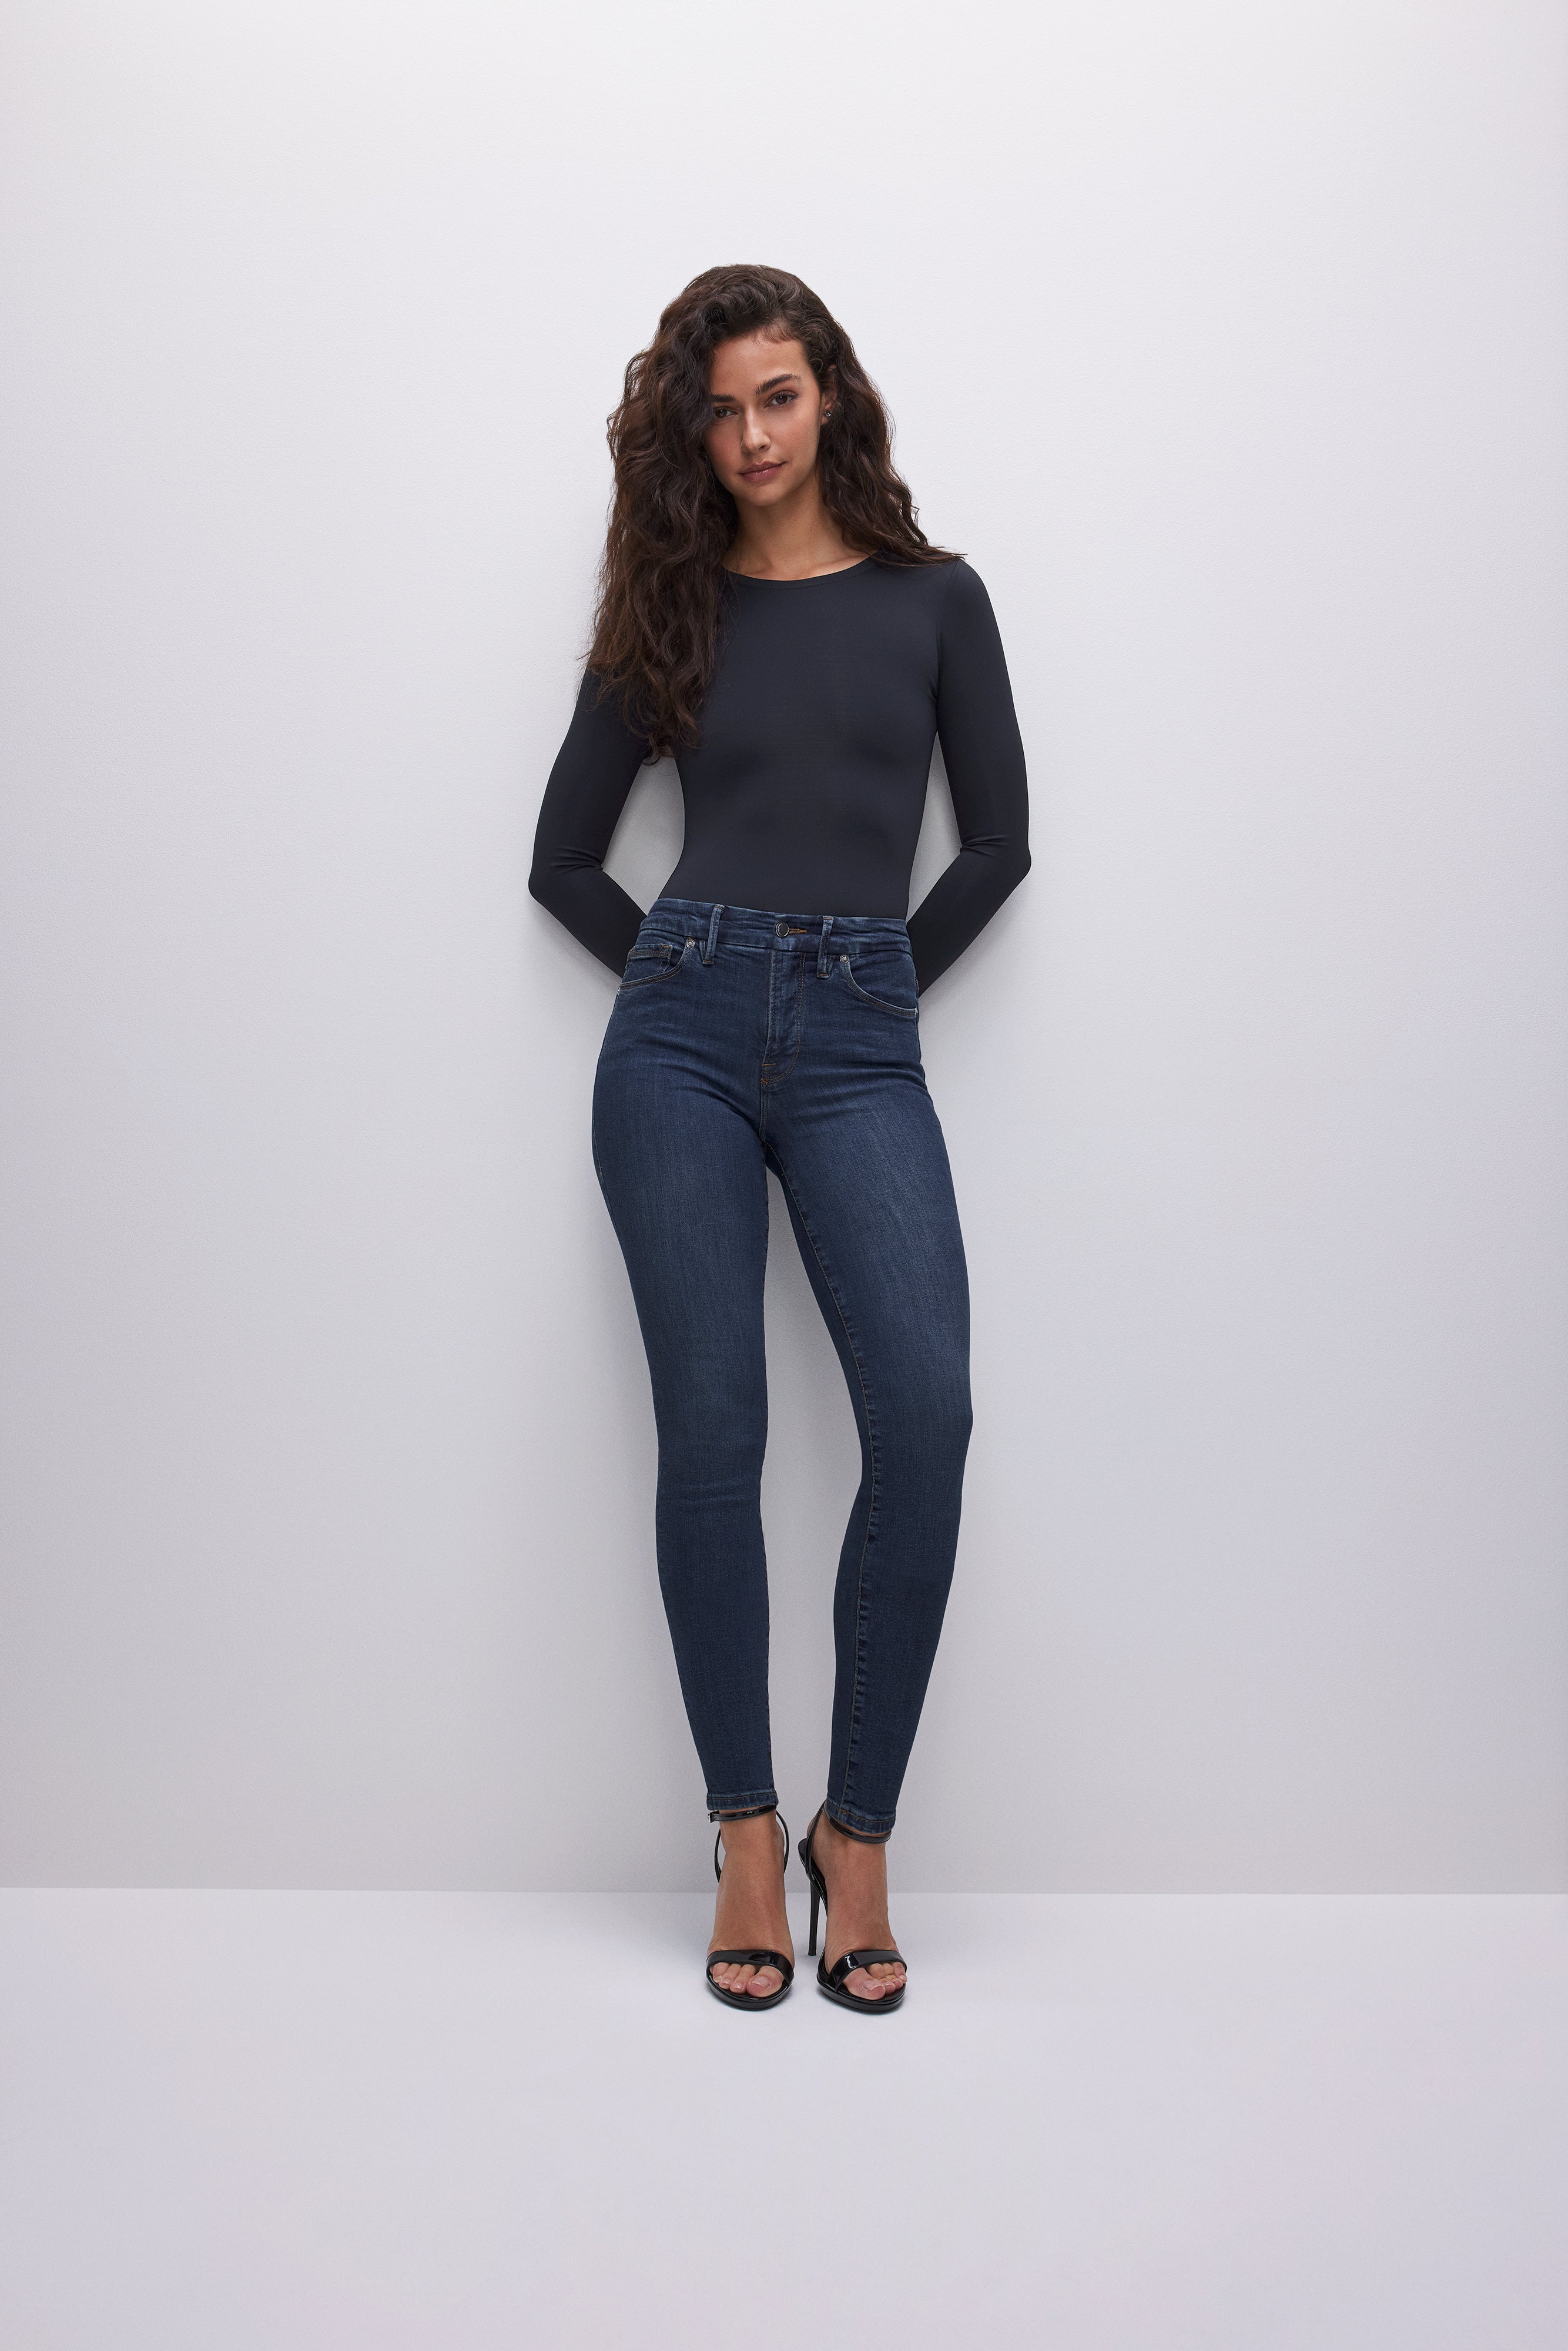 Women's High Waisted Jeans - GOOD AMERICAN